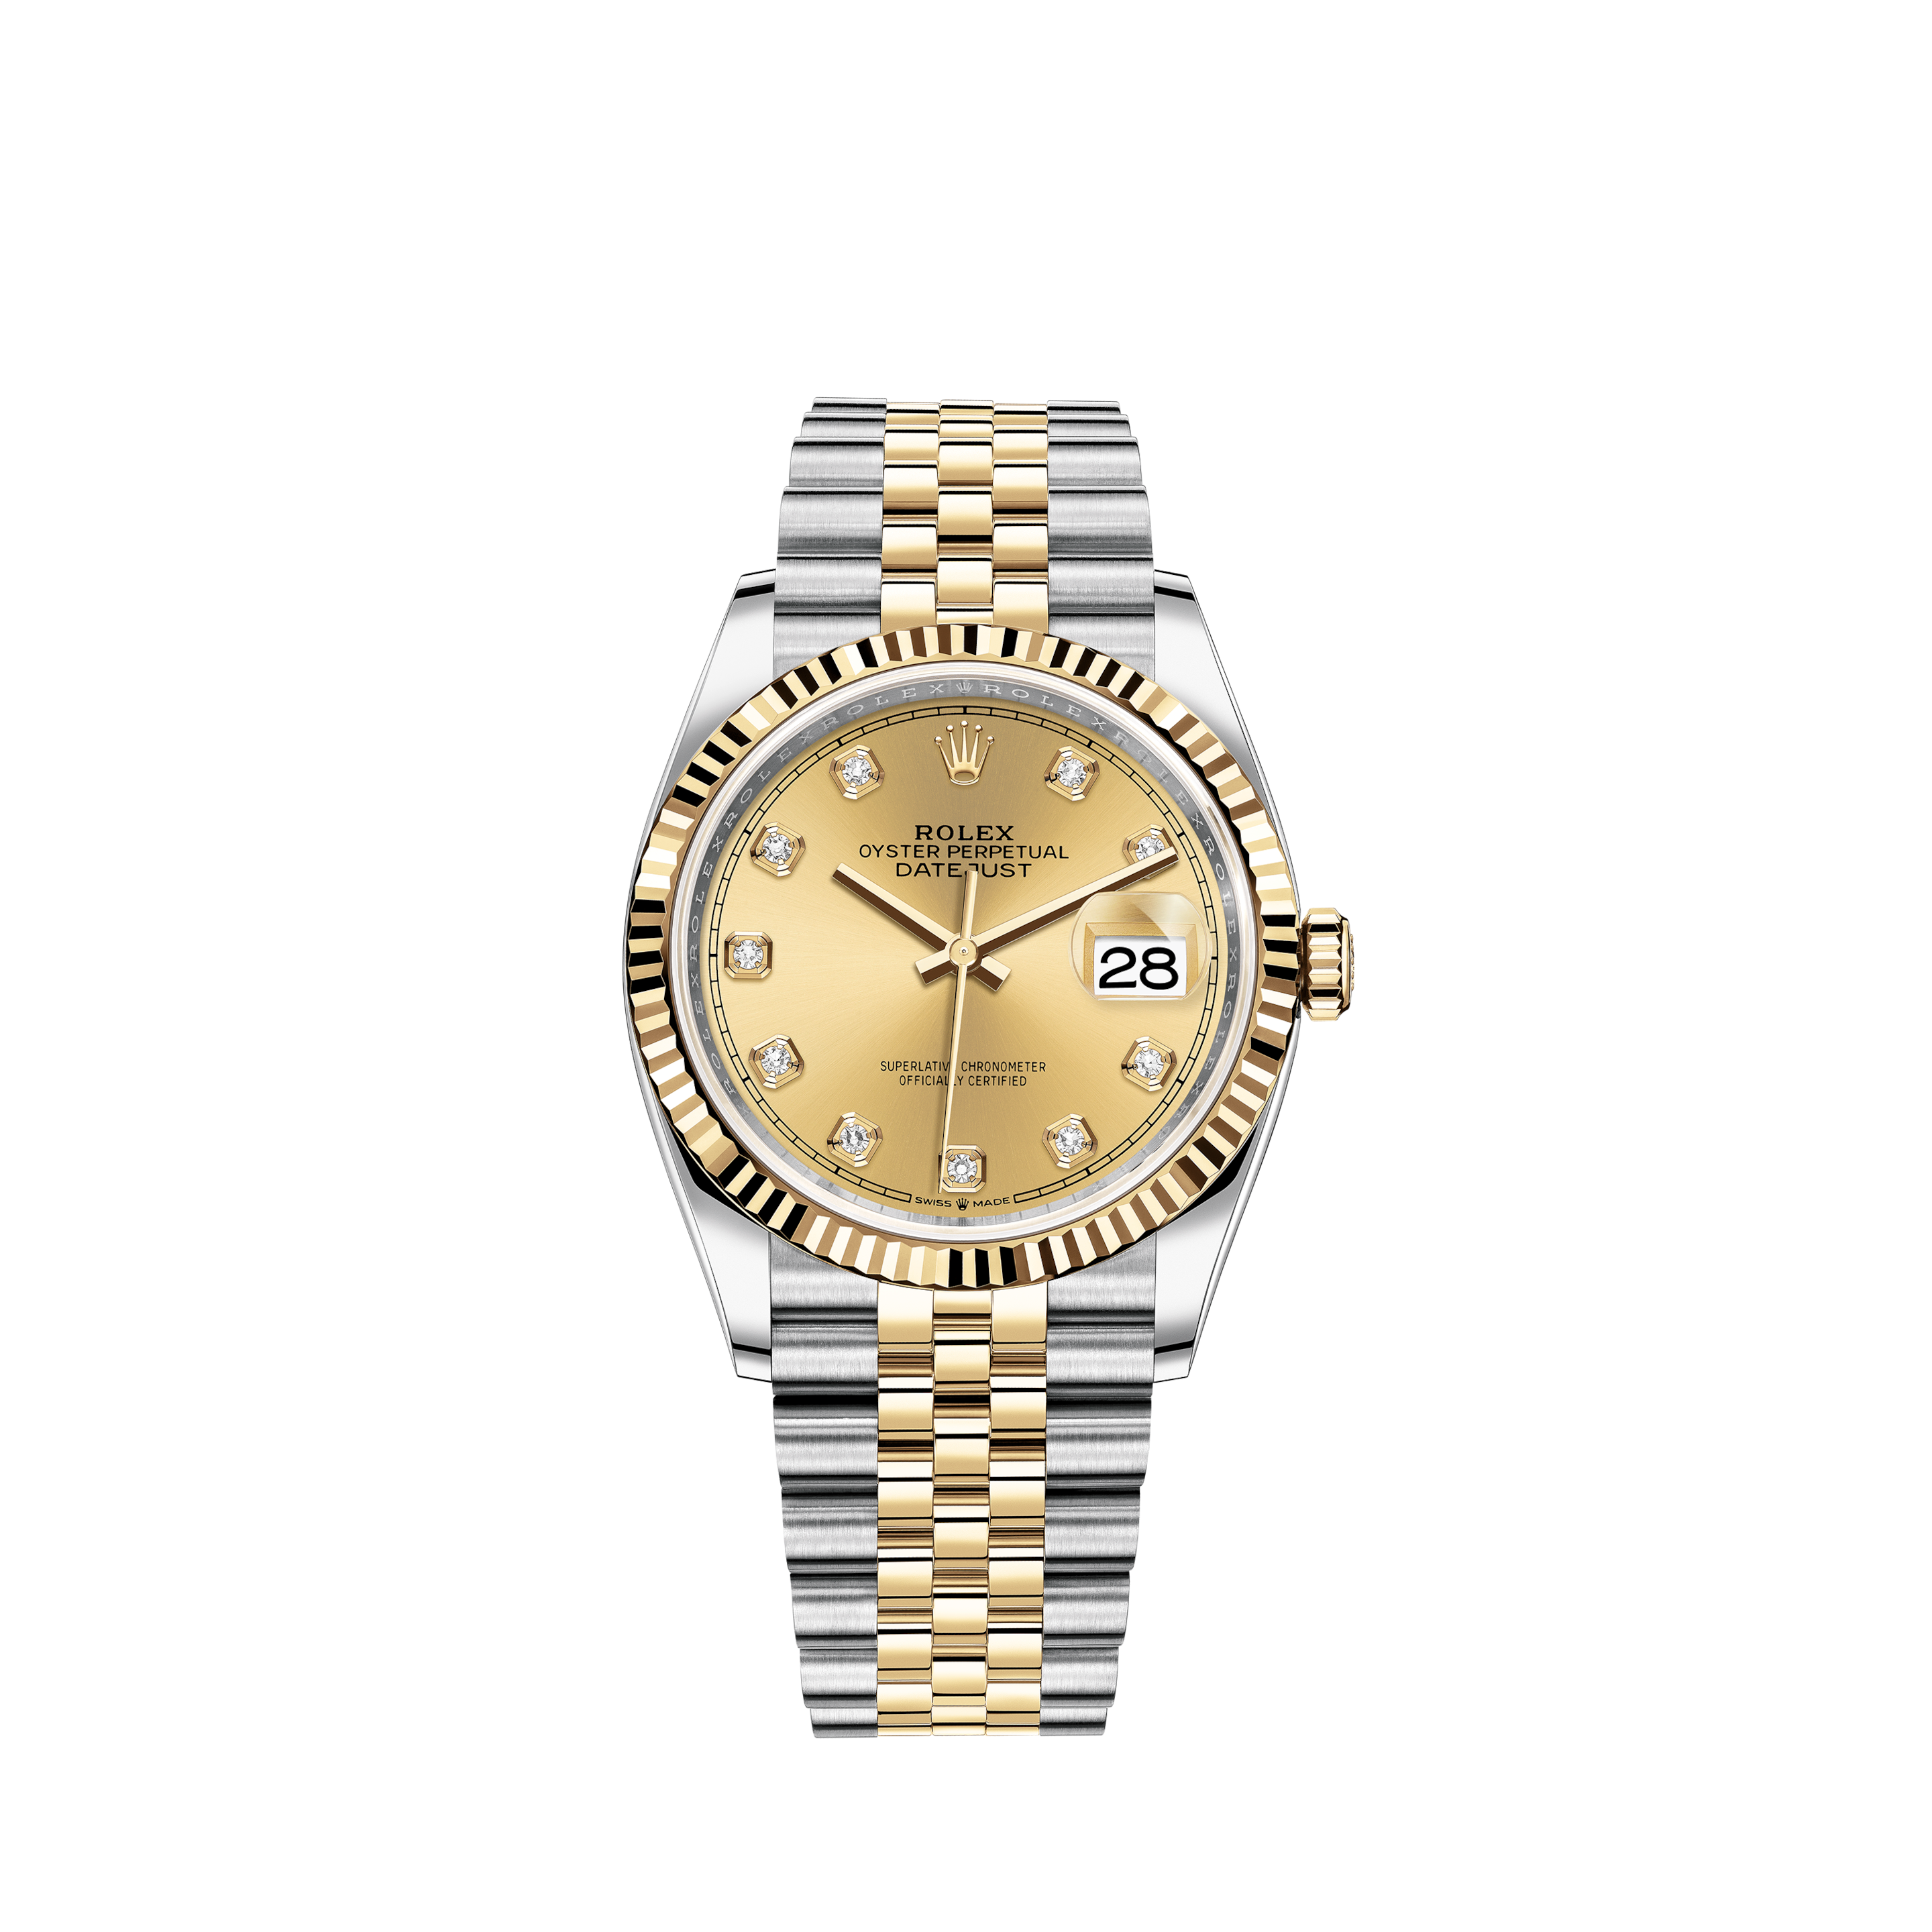 Rolex Women's New Style Two-Tone Datejust with Custom Dark Mother of Pearl Diamond Dial and Bezel on Oyster Band